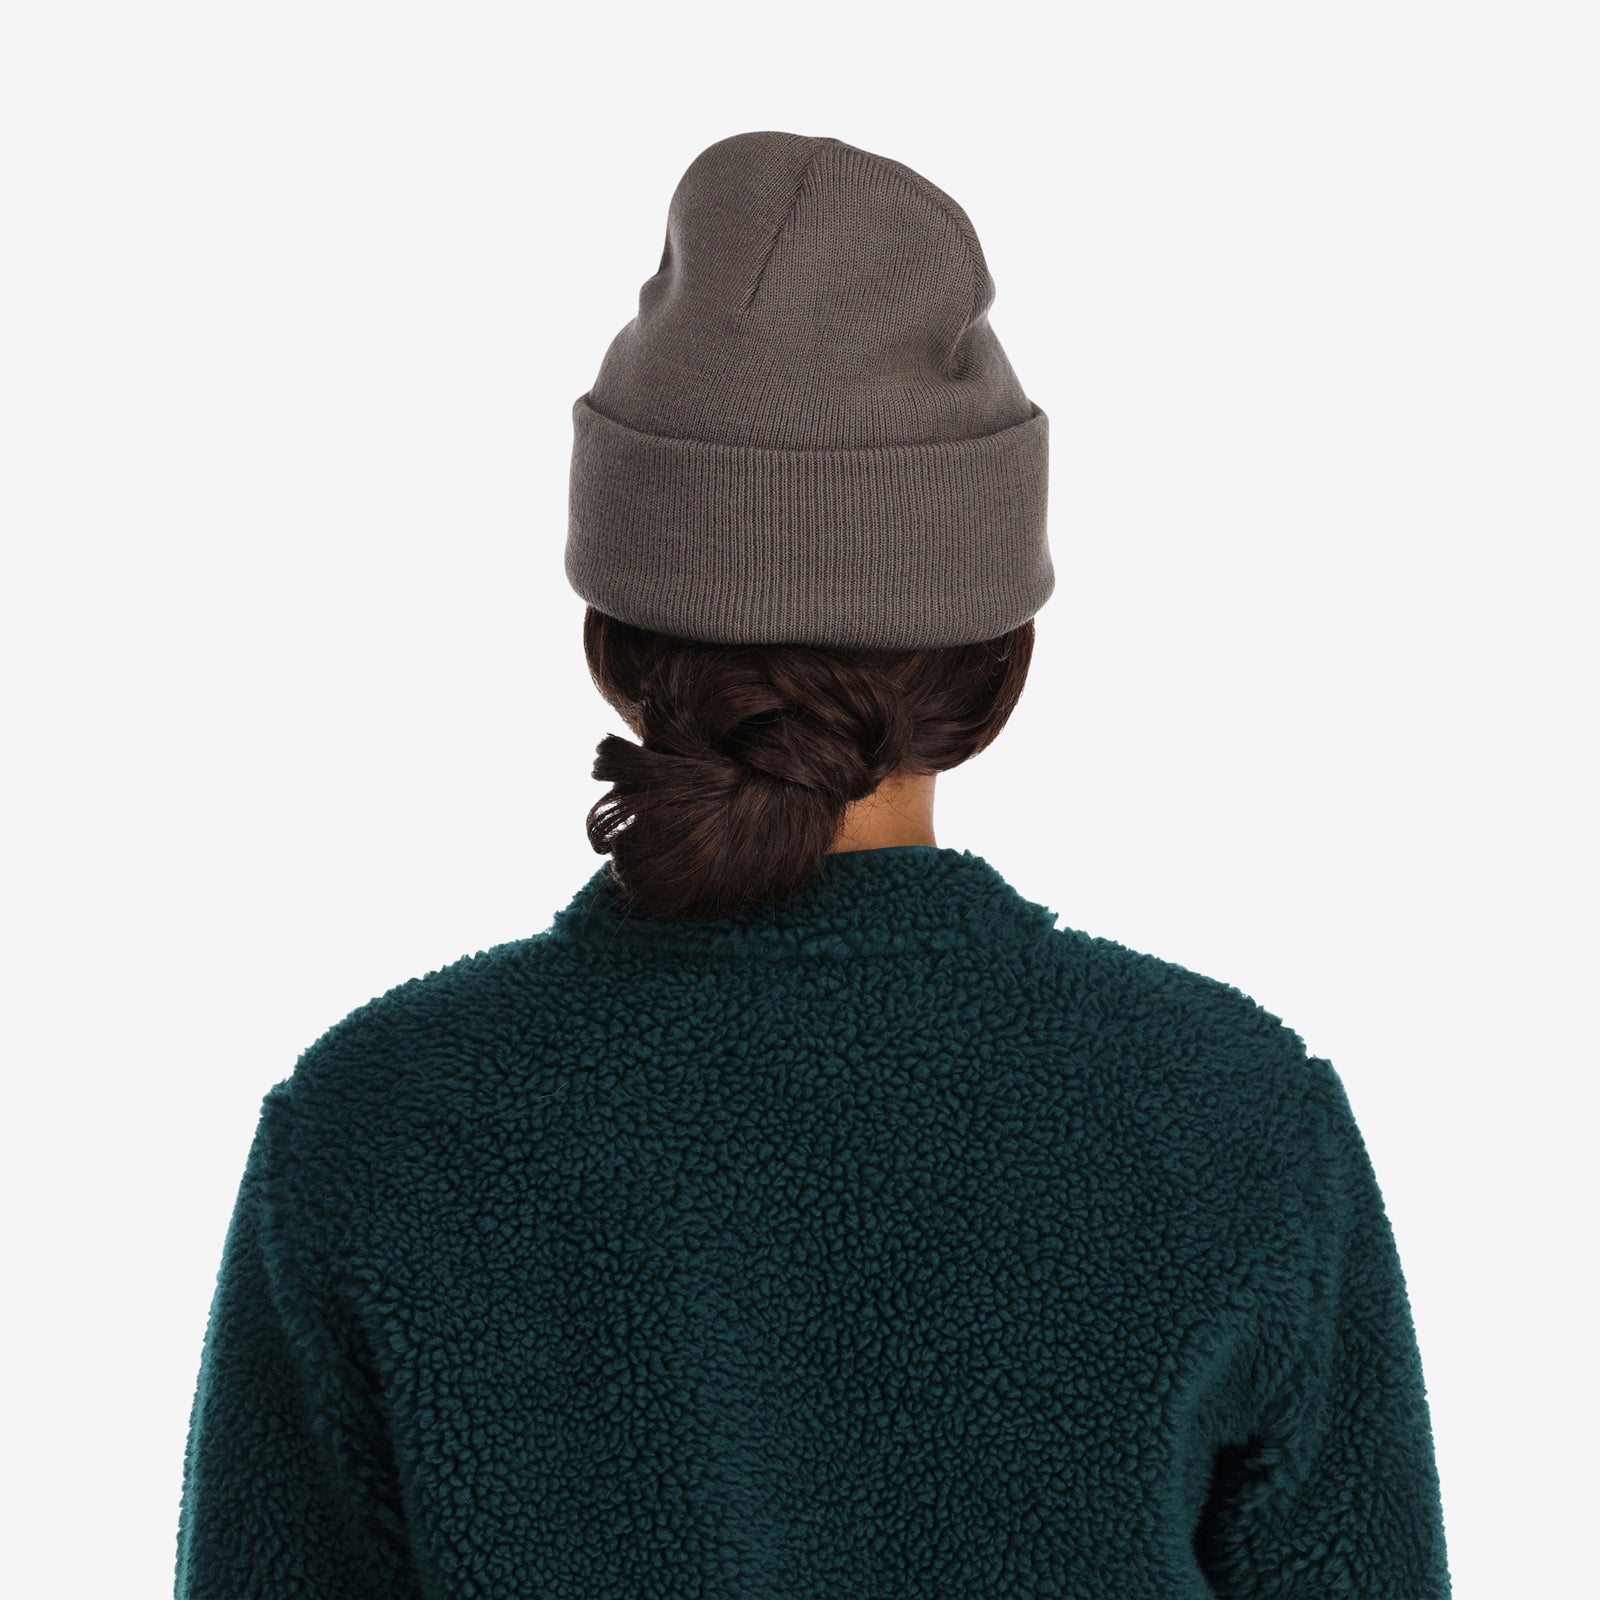 General back model shot of Topo Designs Work Cap cuffed beanie in "Charcoal" gray